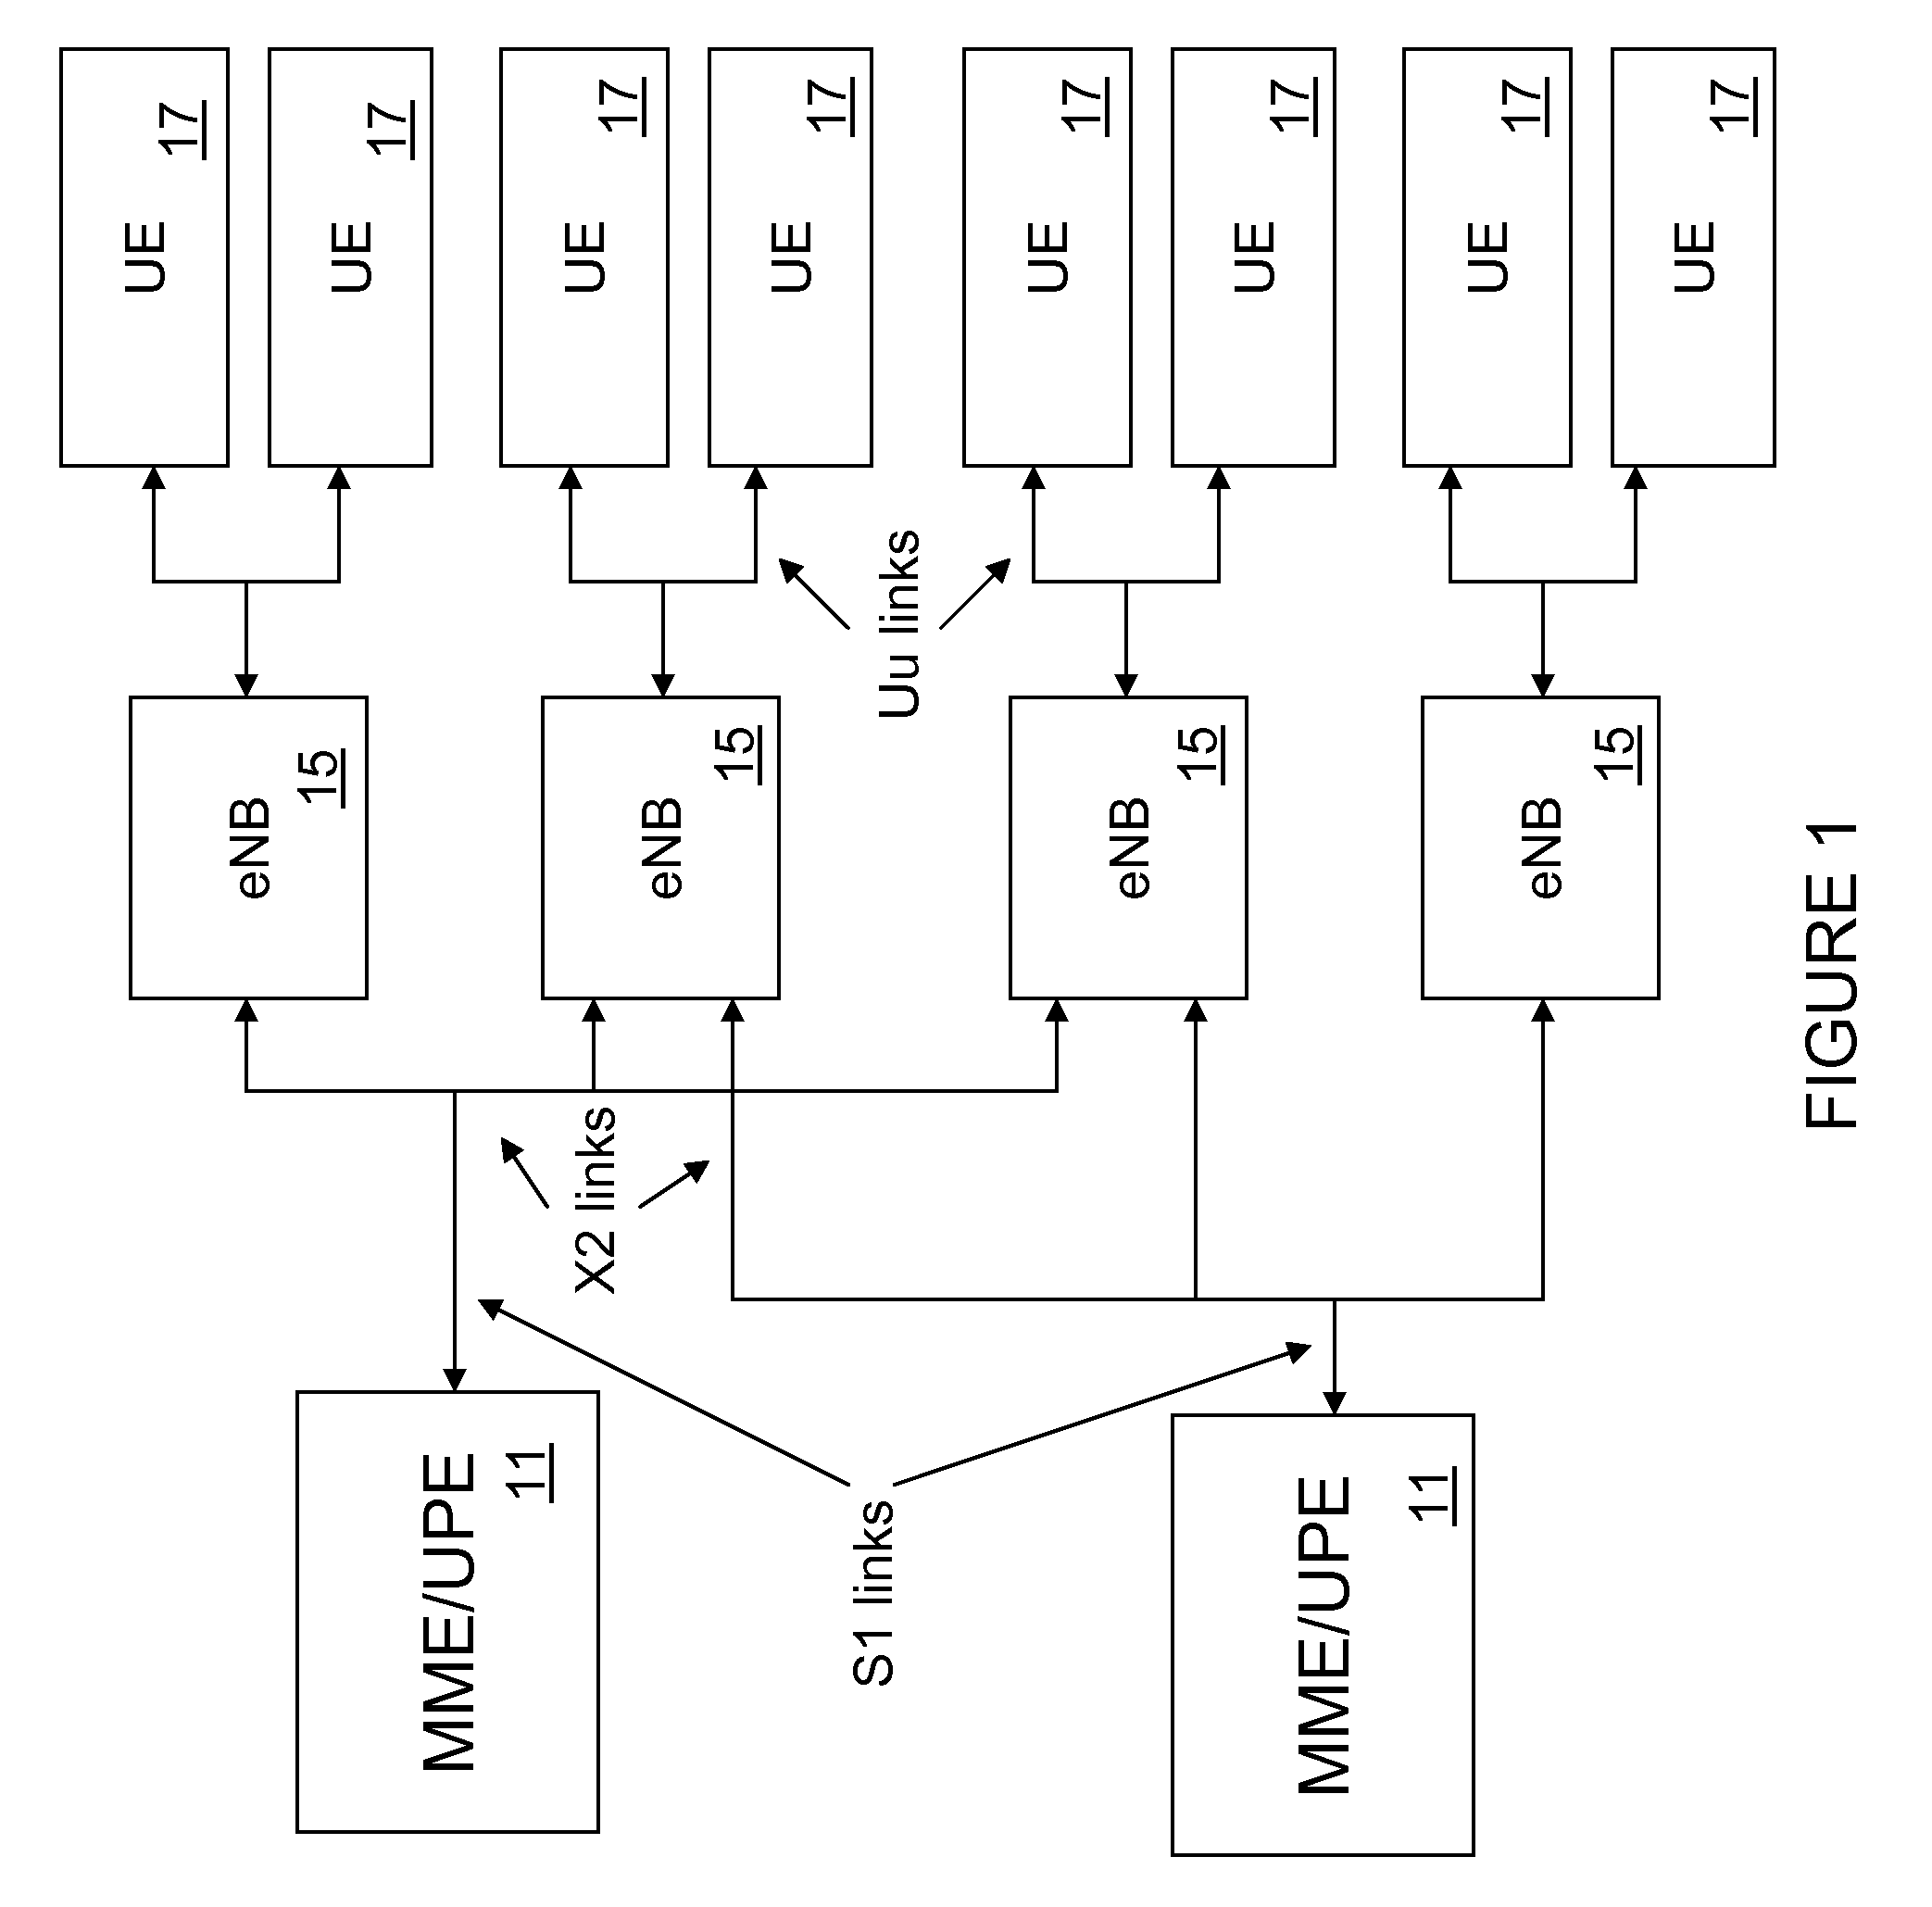 System and method for providing closed subscriber groups in a packet-based wireless communication system